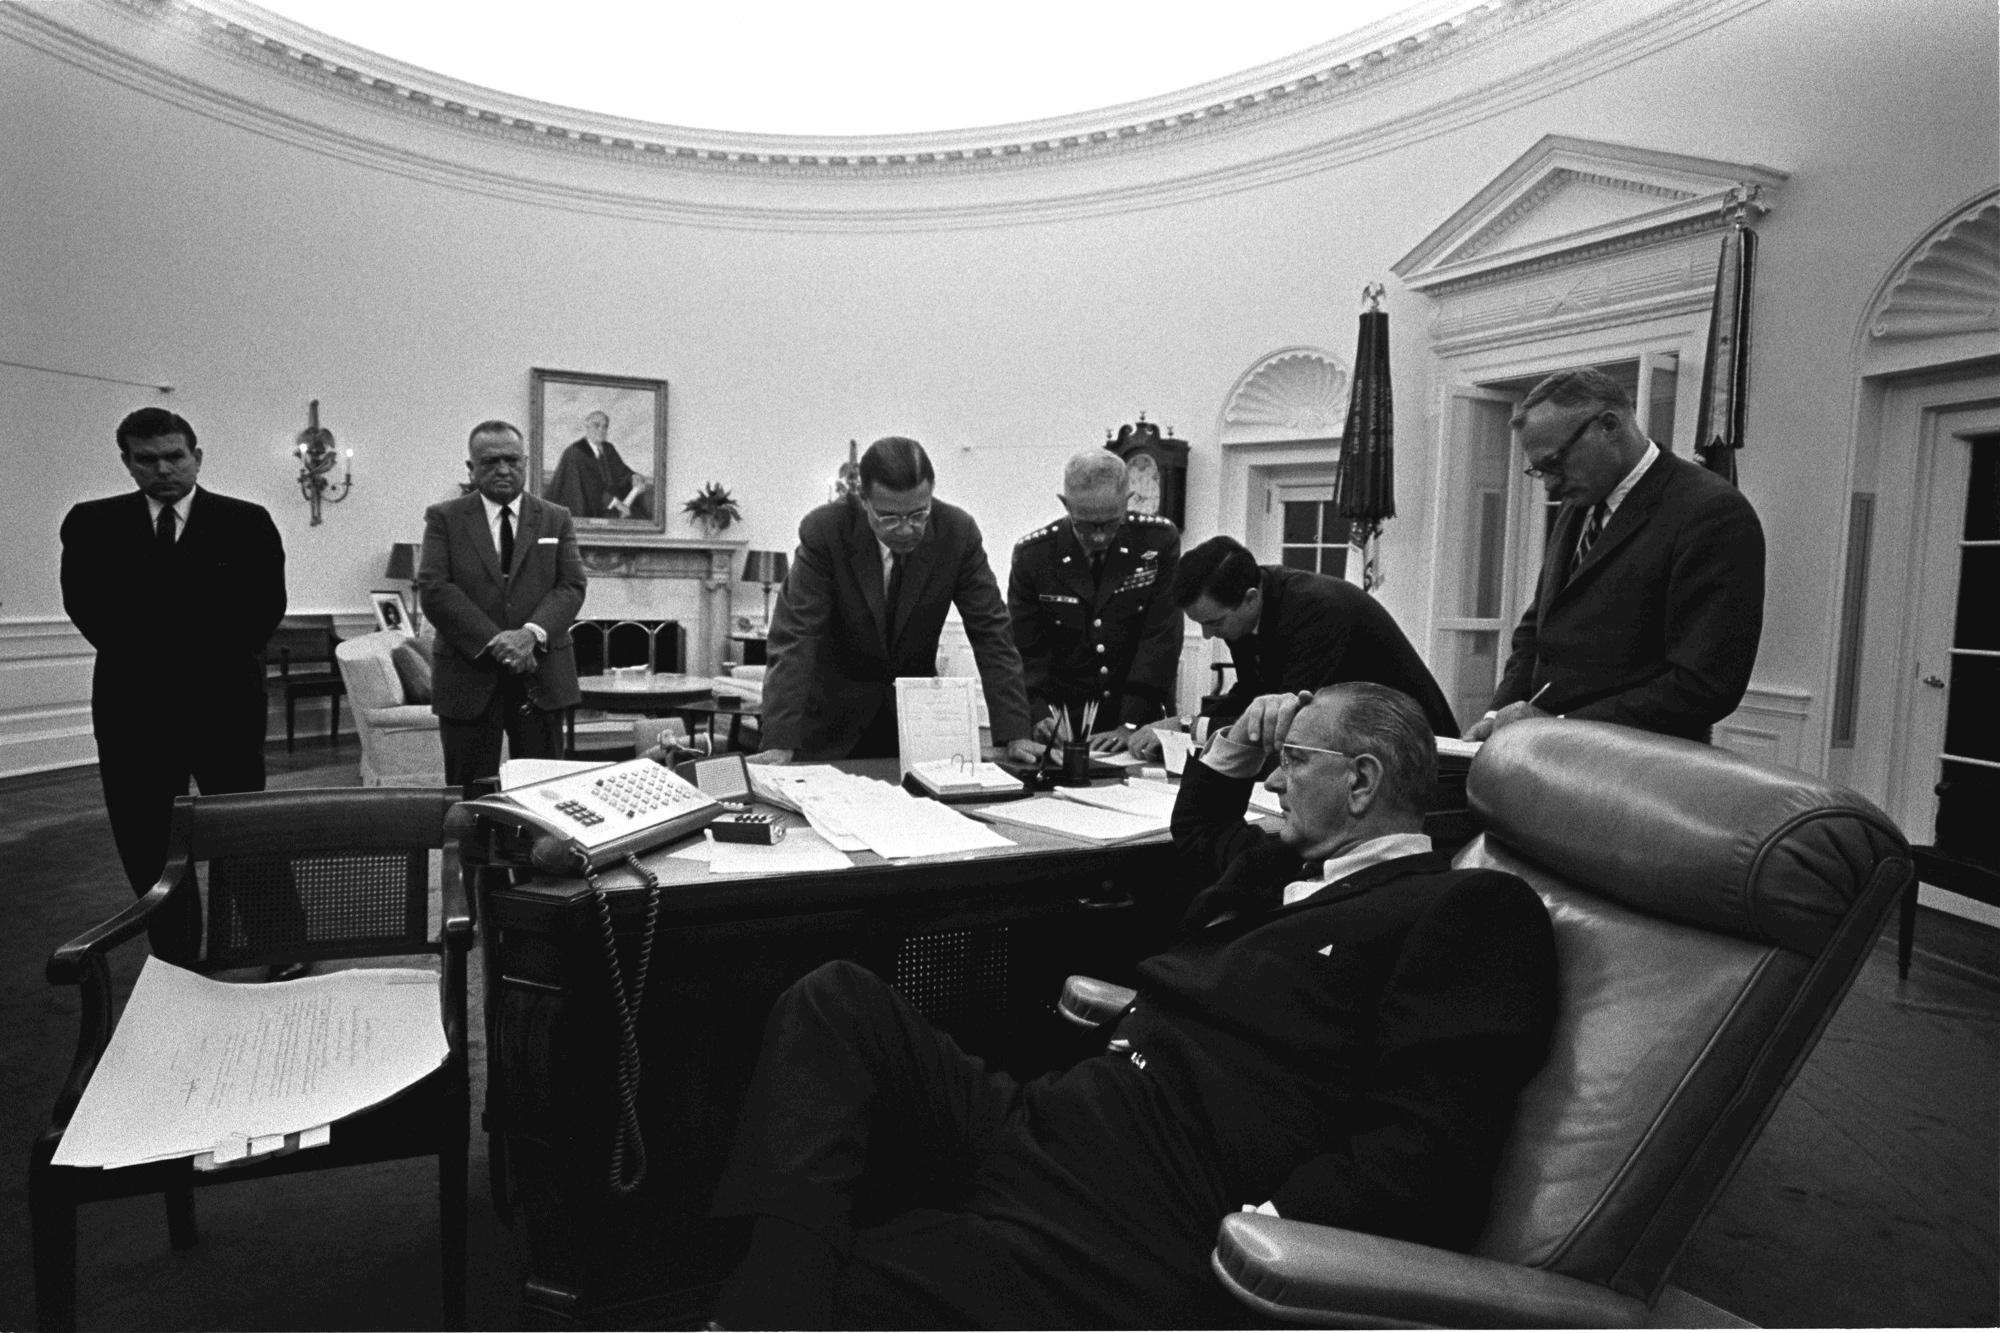 President Lyndon B. Johnson, seated, discusses the 1967 Detroit riot with members of his staff in the Oval Office. (LBJ Library photo by Yoichi Okamoto)